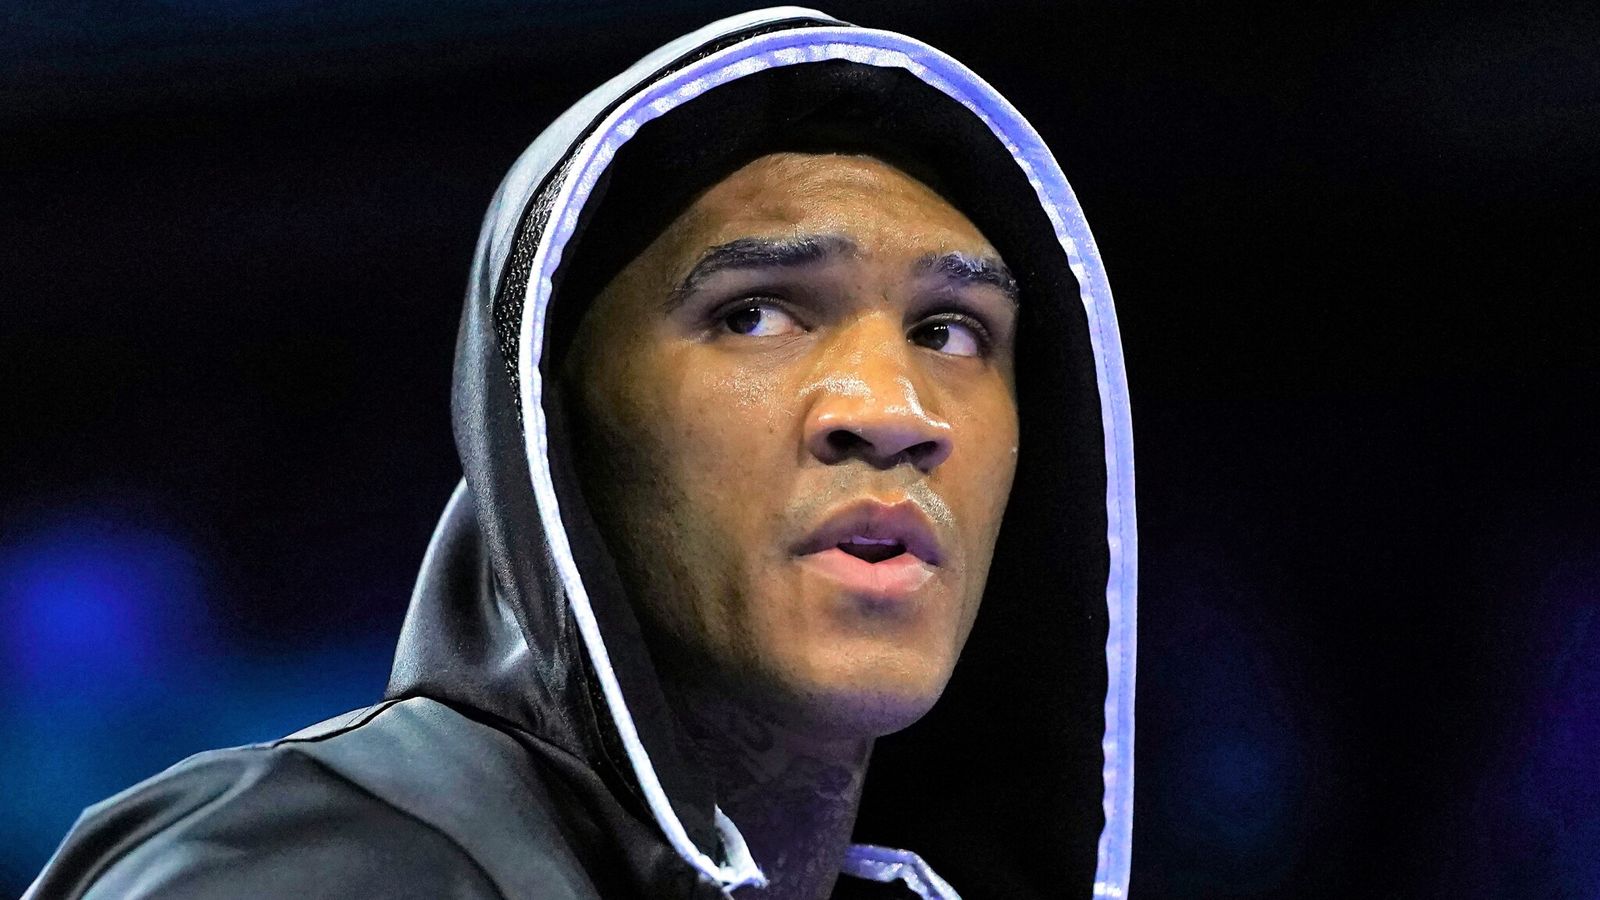 uk-anti-doping-agency-confirms-conor-benn-drugs-charge-and-provisional-suspension